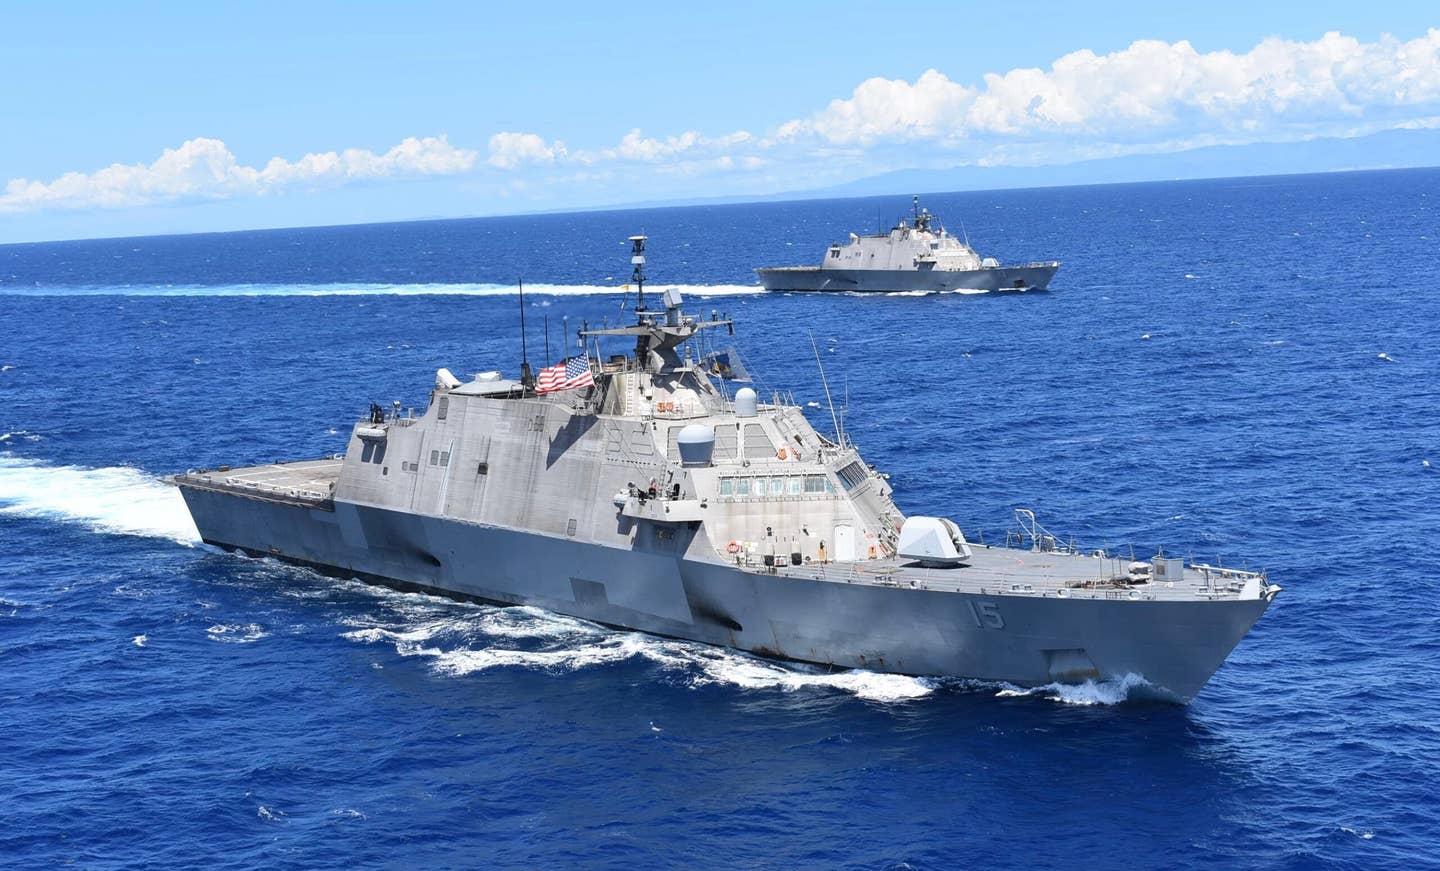 The <em>Freedom</em> class ships USS <em>Billings</em> (LCS 15) and USS <em>Wichita</em> (LCS 13) participate in a photo exercise in the Caribbean Sea, Sept. 10, 2022. <em>U.S. Navy photo by Mineman 2nd Class Justin Hovarter/Released</em>